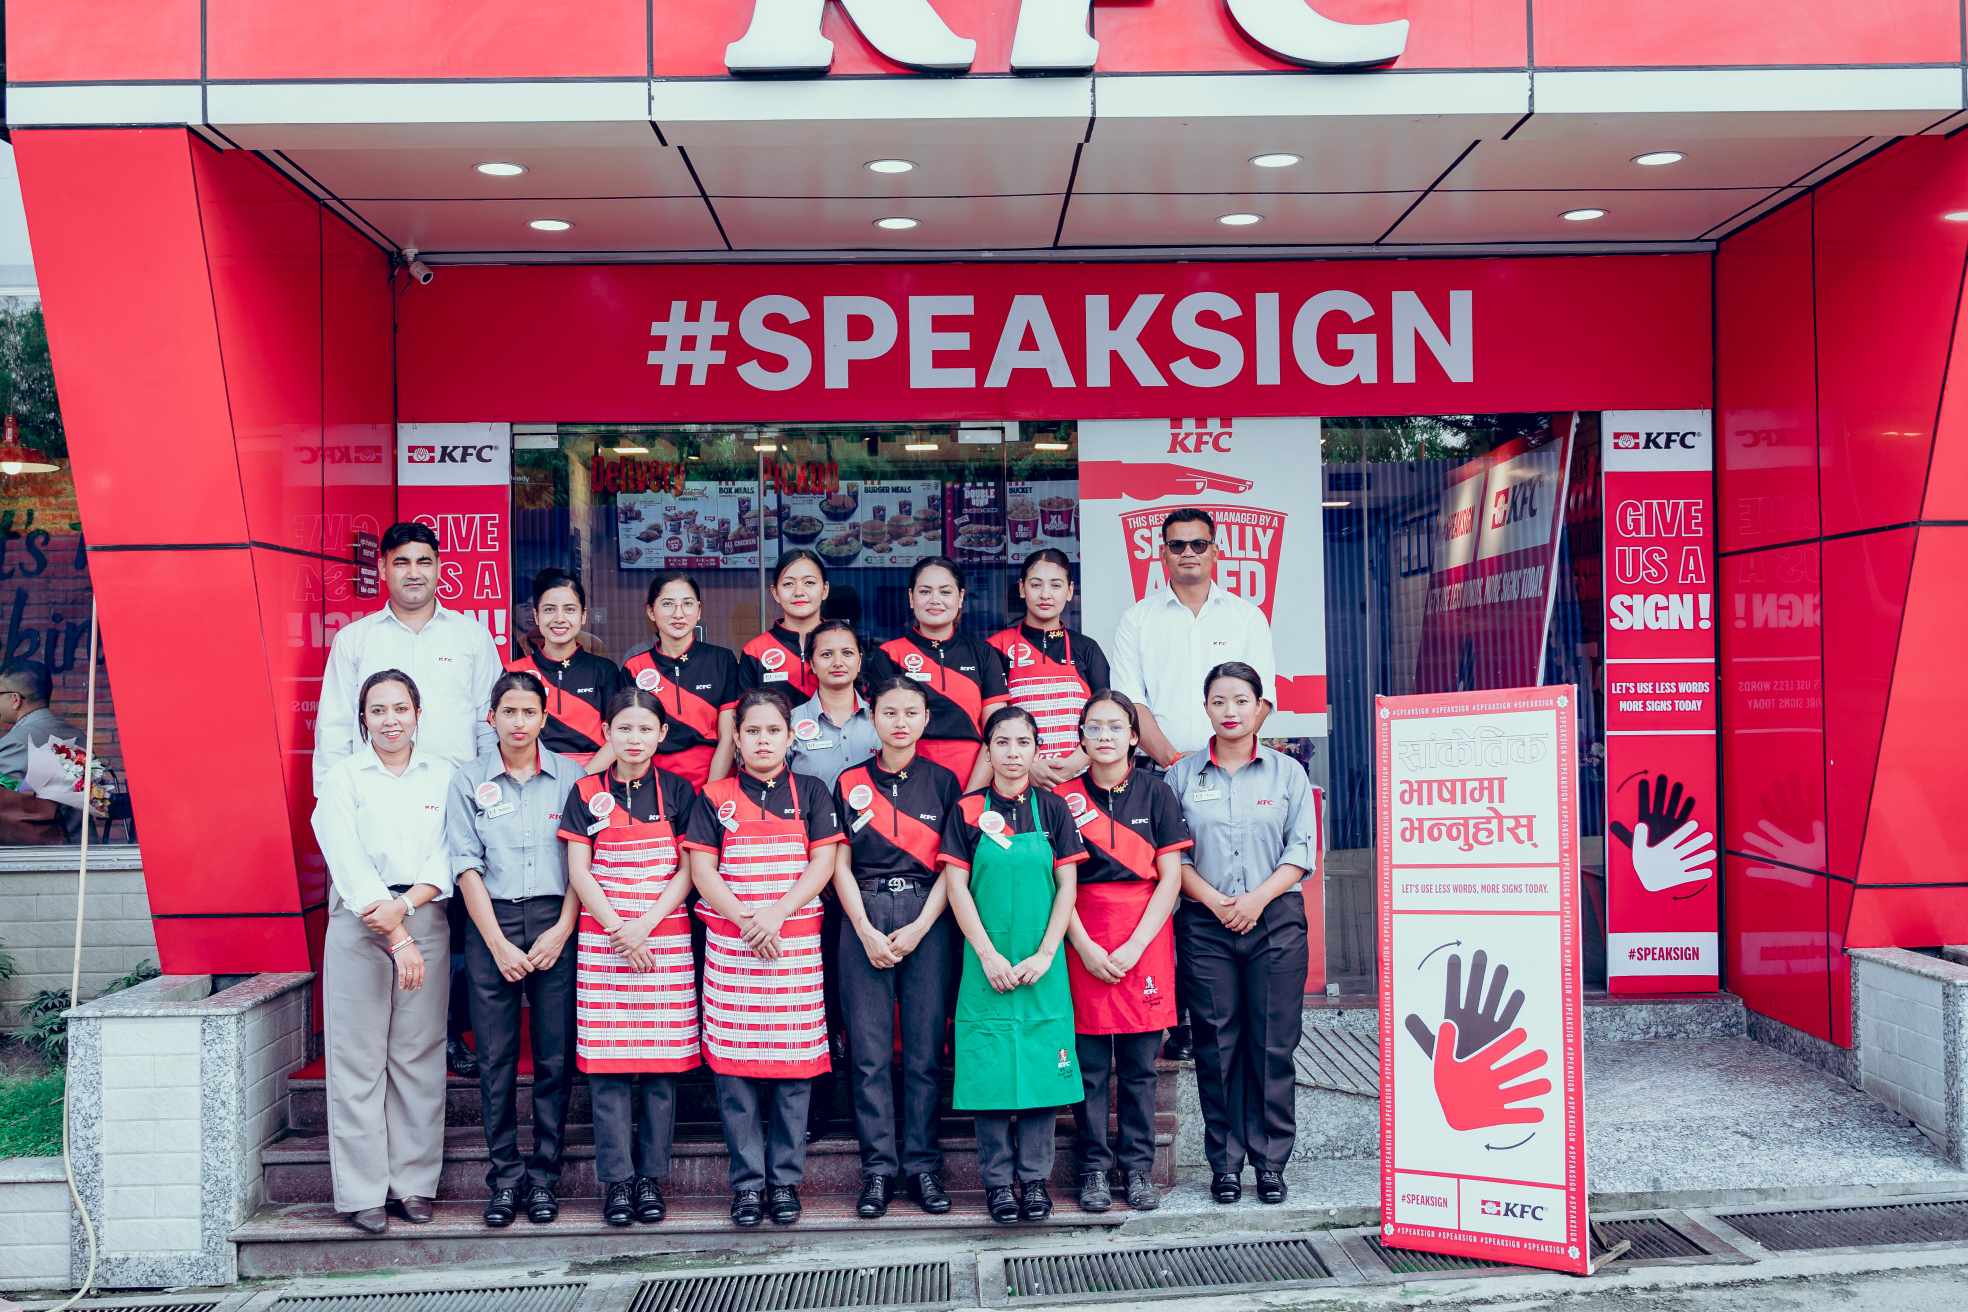 Devyani International Nepal Pvt. Ltd. opens first KFC with a majority of specially-abled women team members (video)